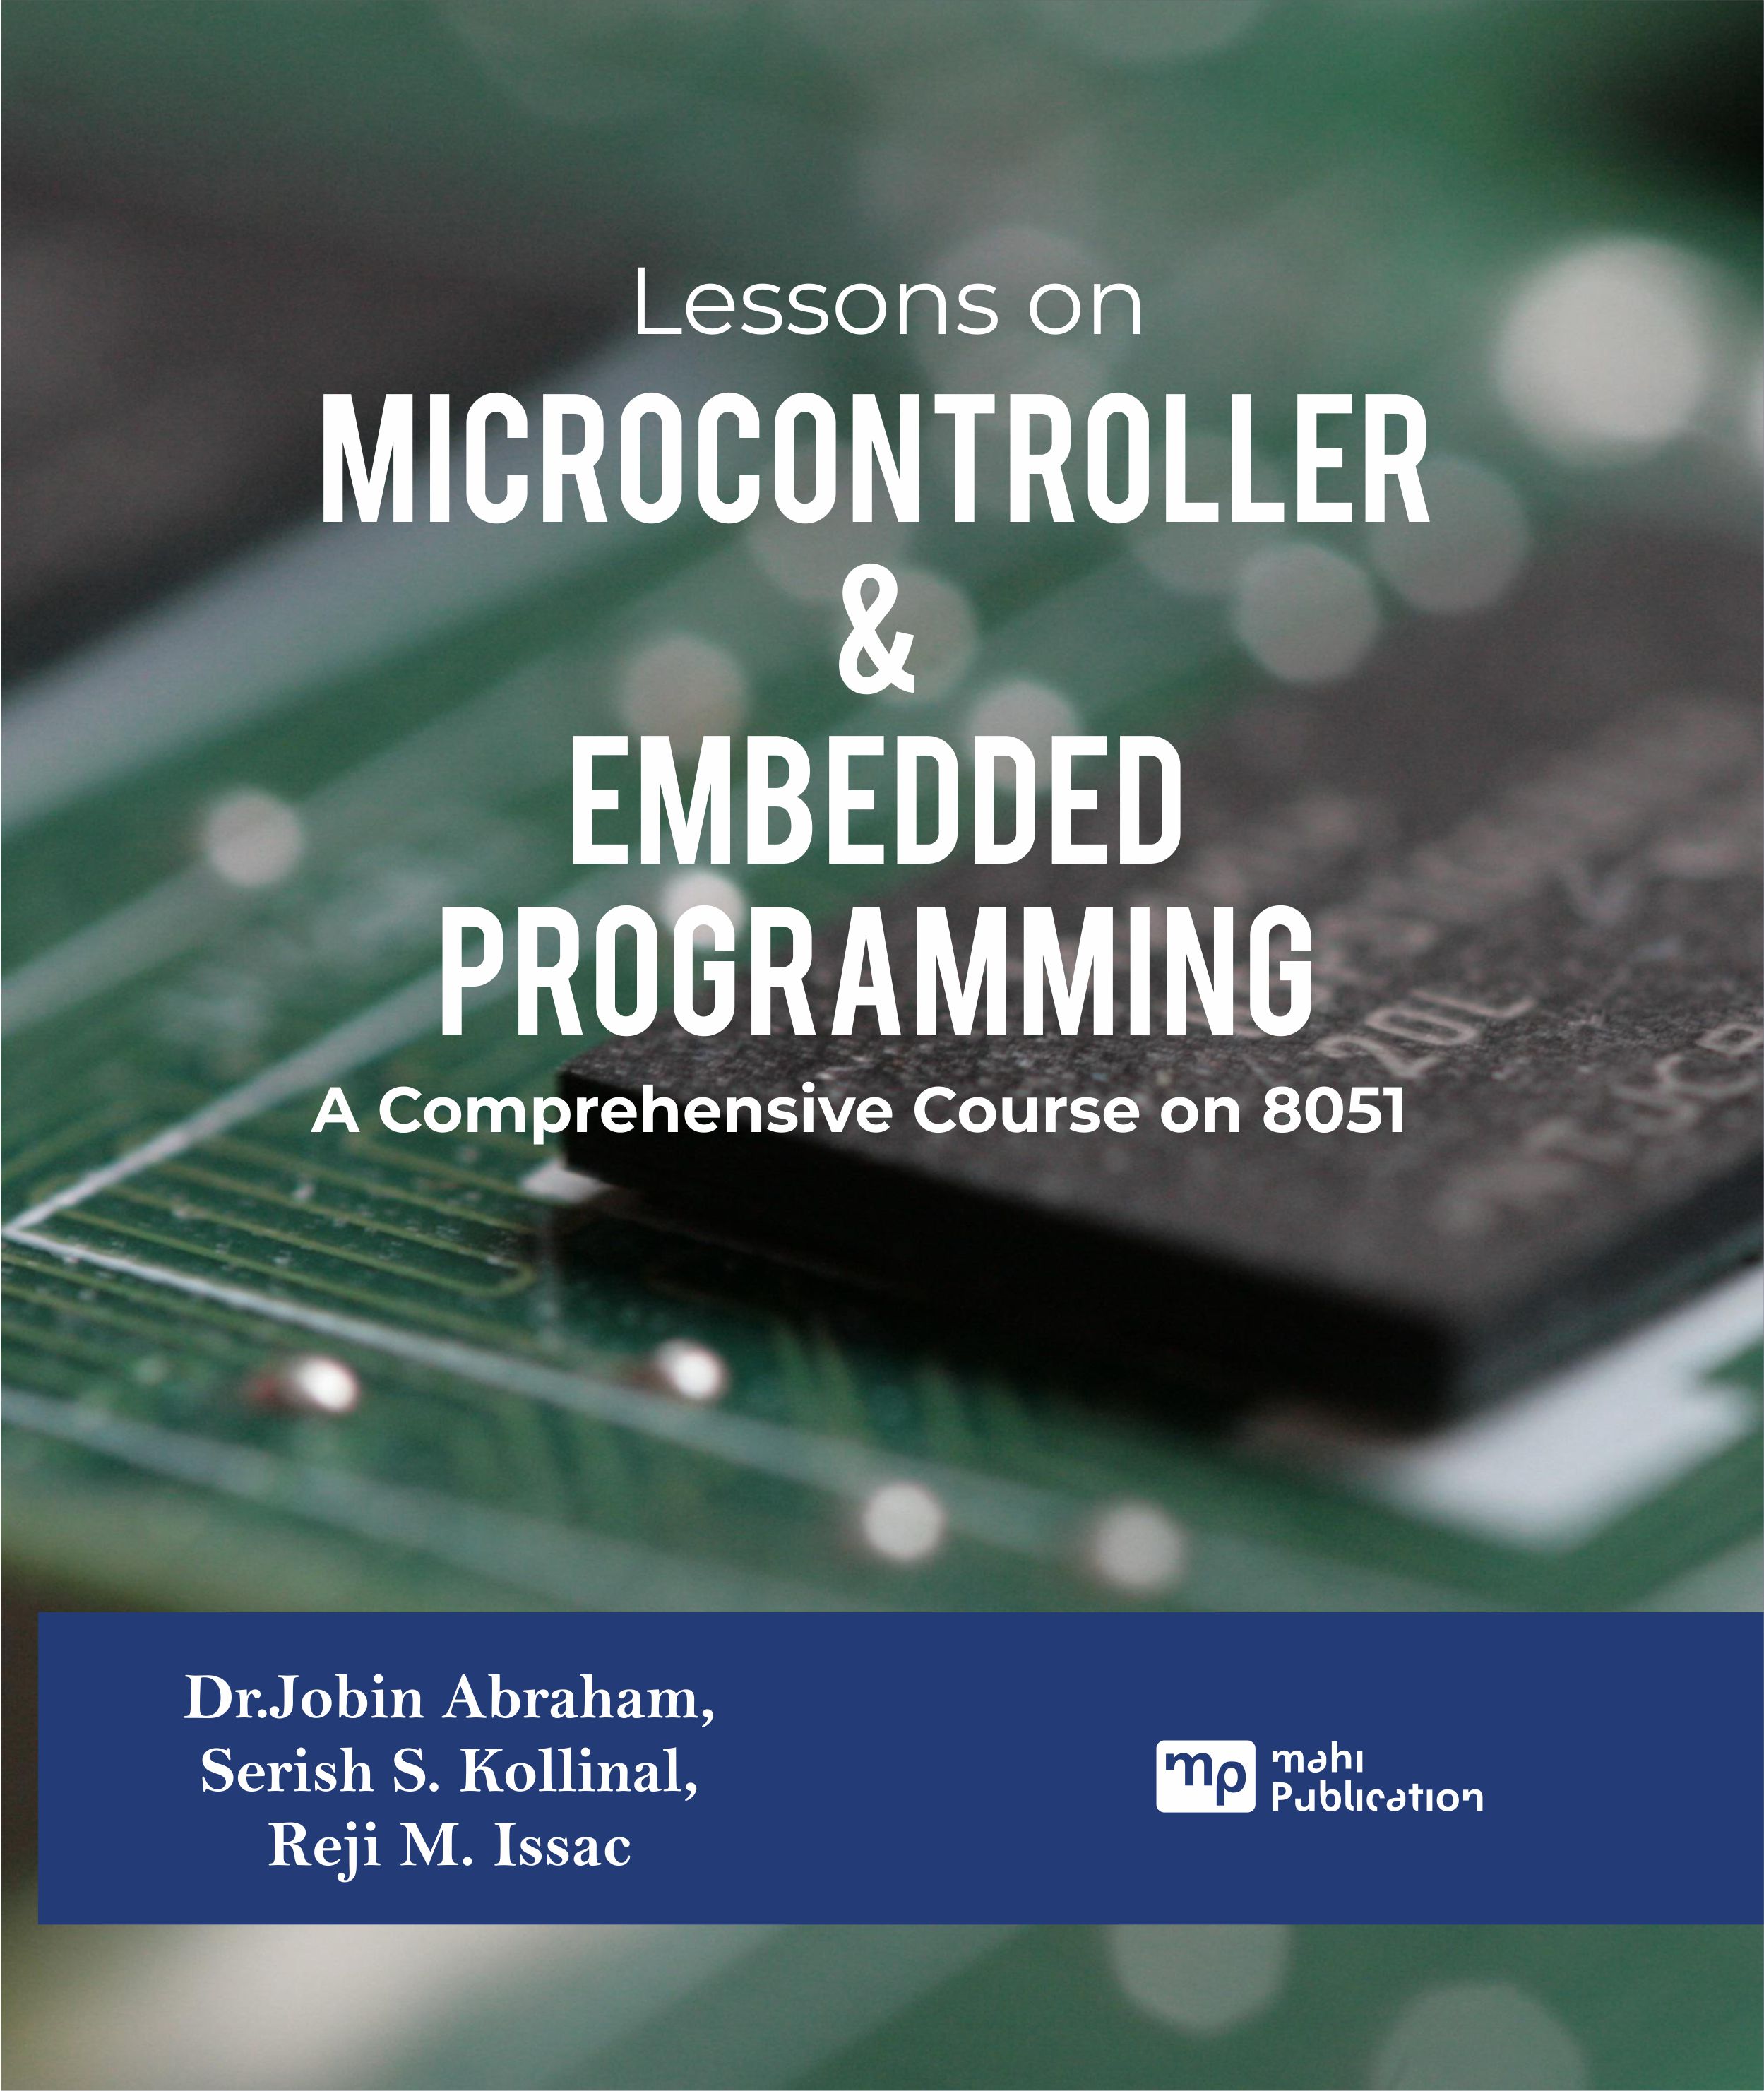 Lessons on Microcontroller & Embedded Programming A Comprehensive Course on 8051